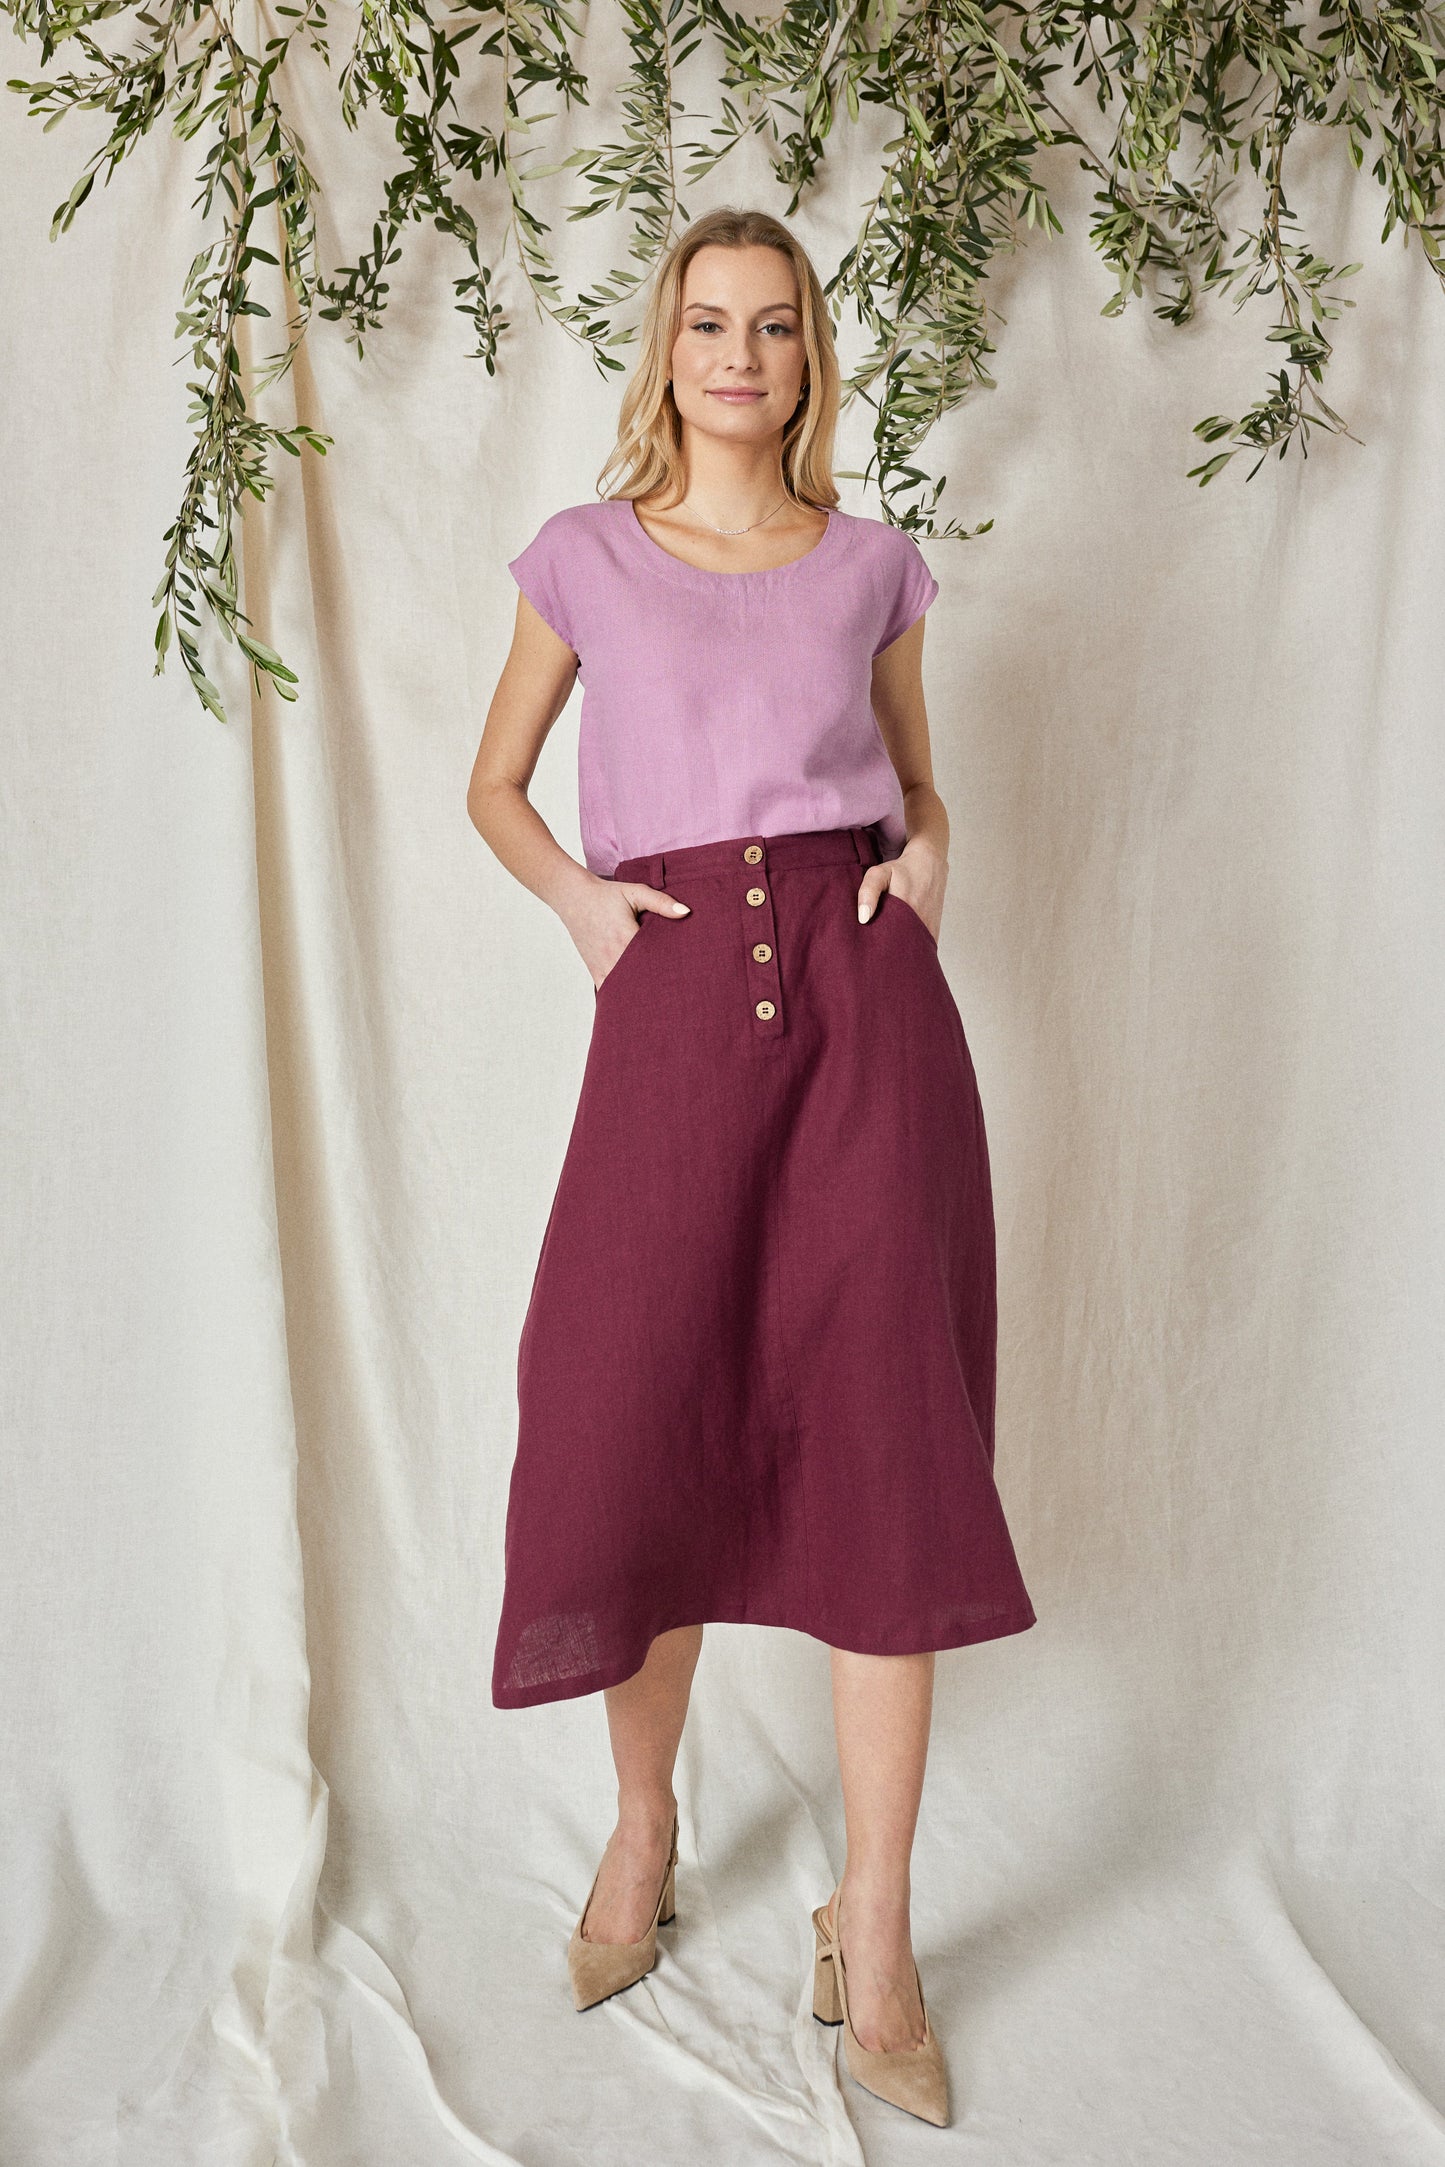 Linen Skirt CLEO in Green with Buttoned Front